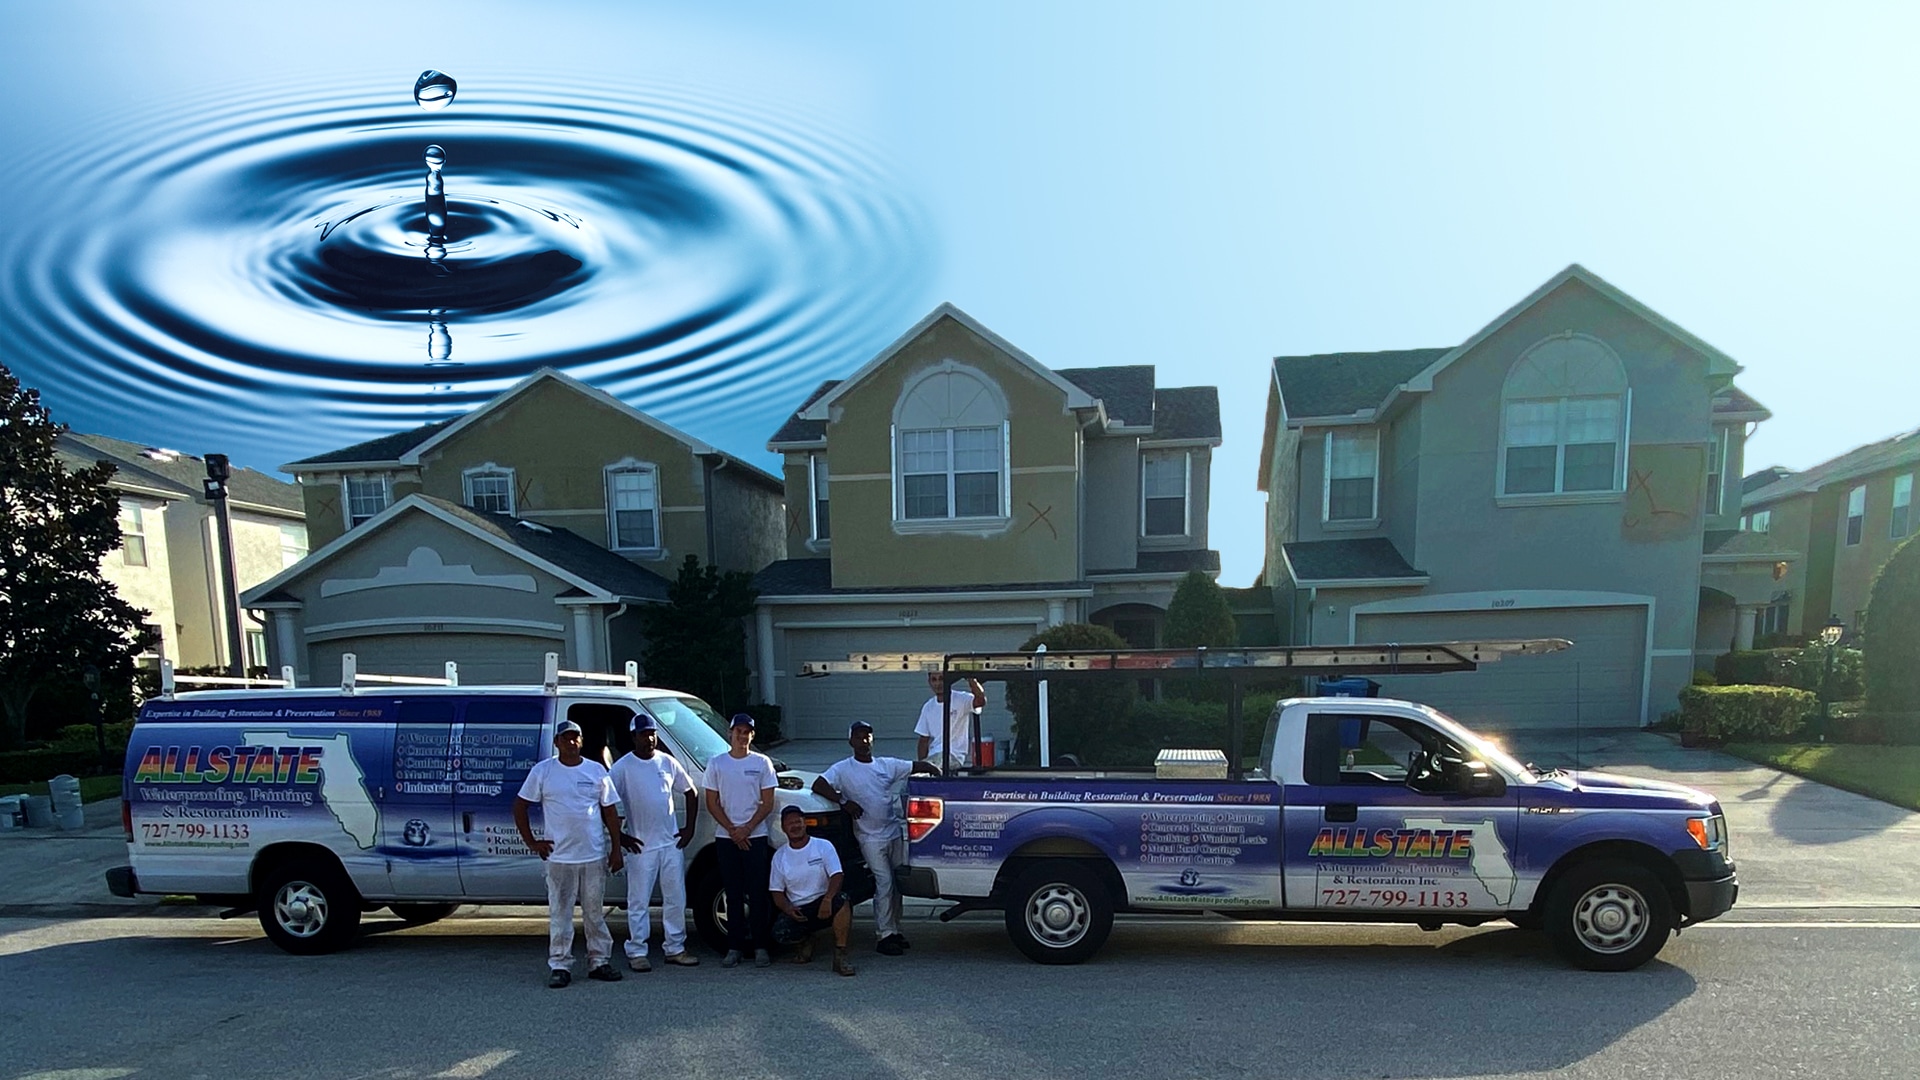 Allstate Waterproofing Painters and Trucks in front of Townhomes to be painted in Tampa Bay Region